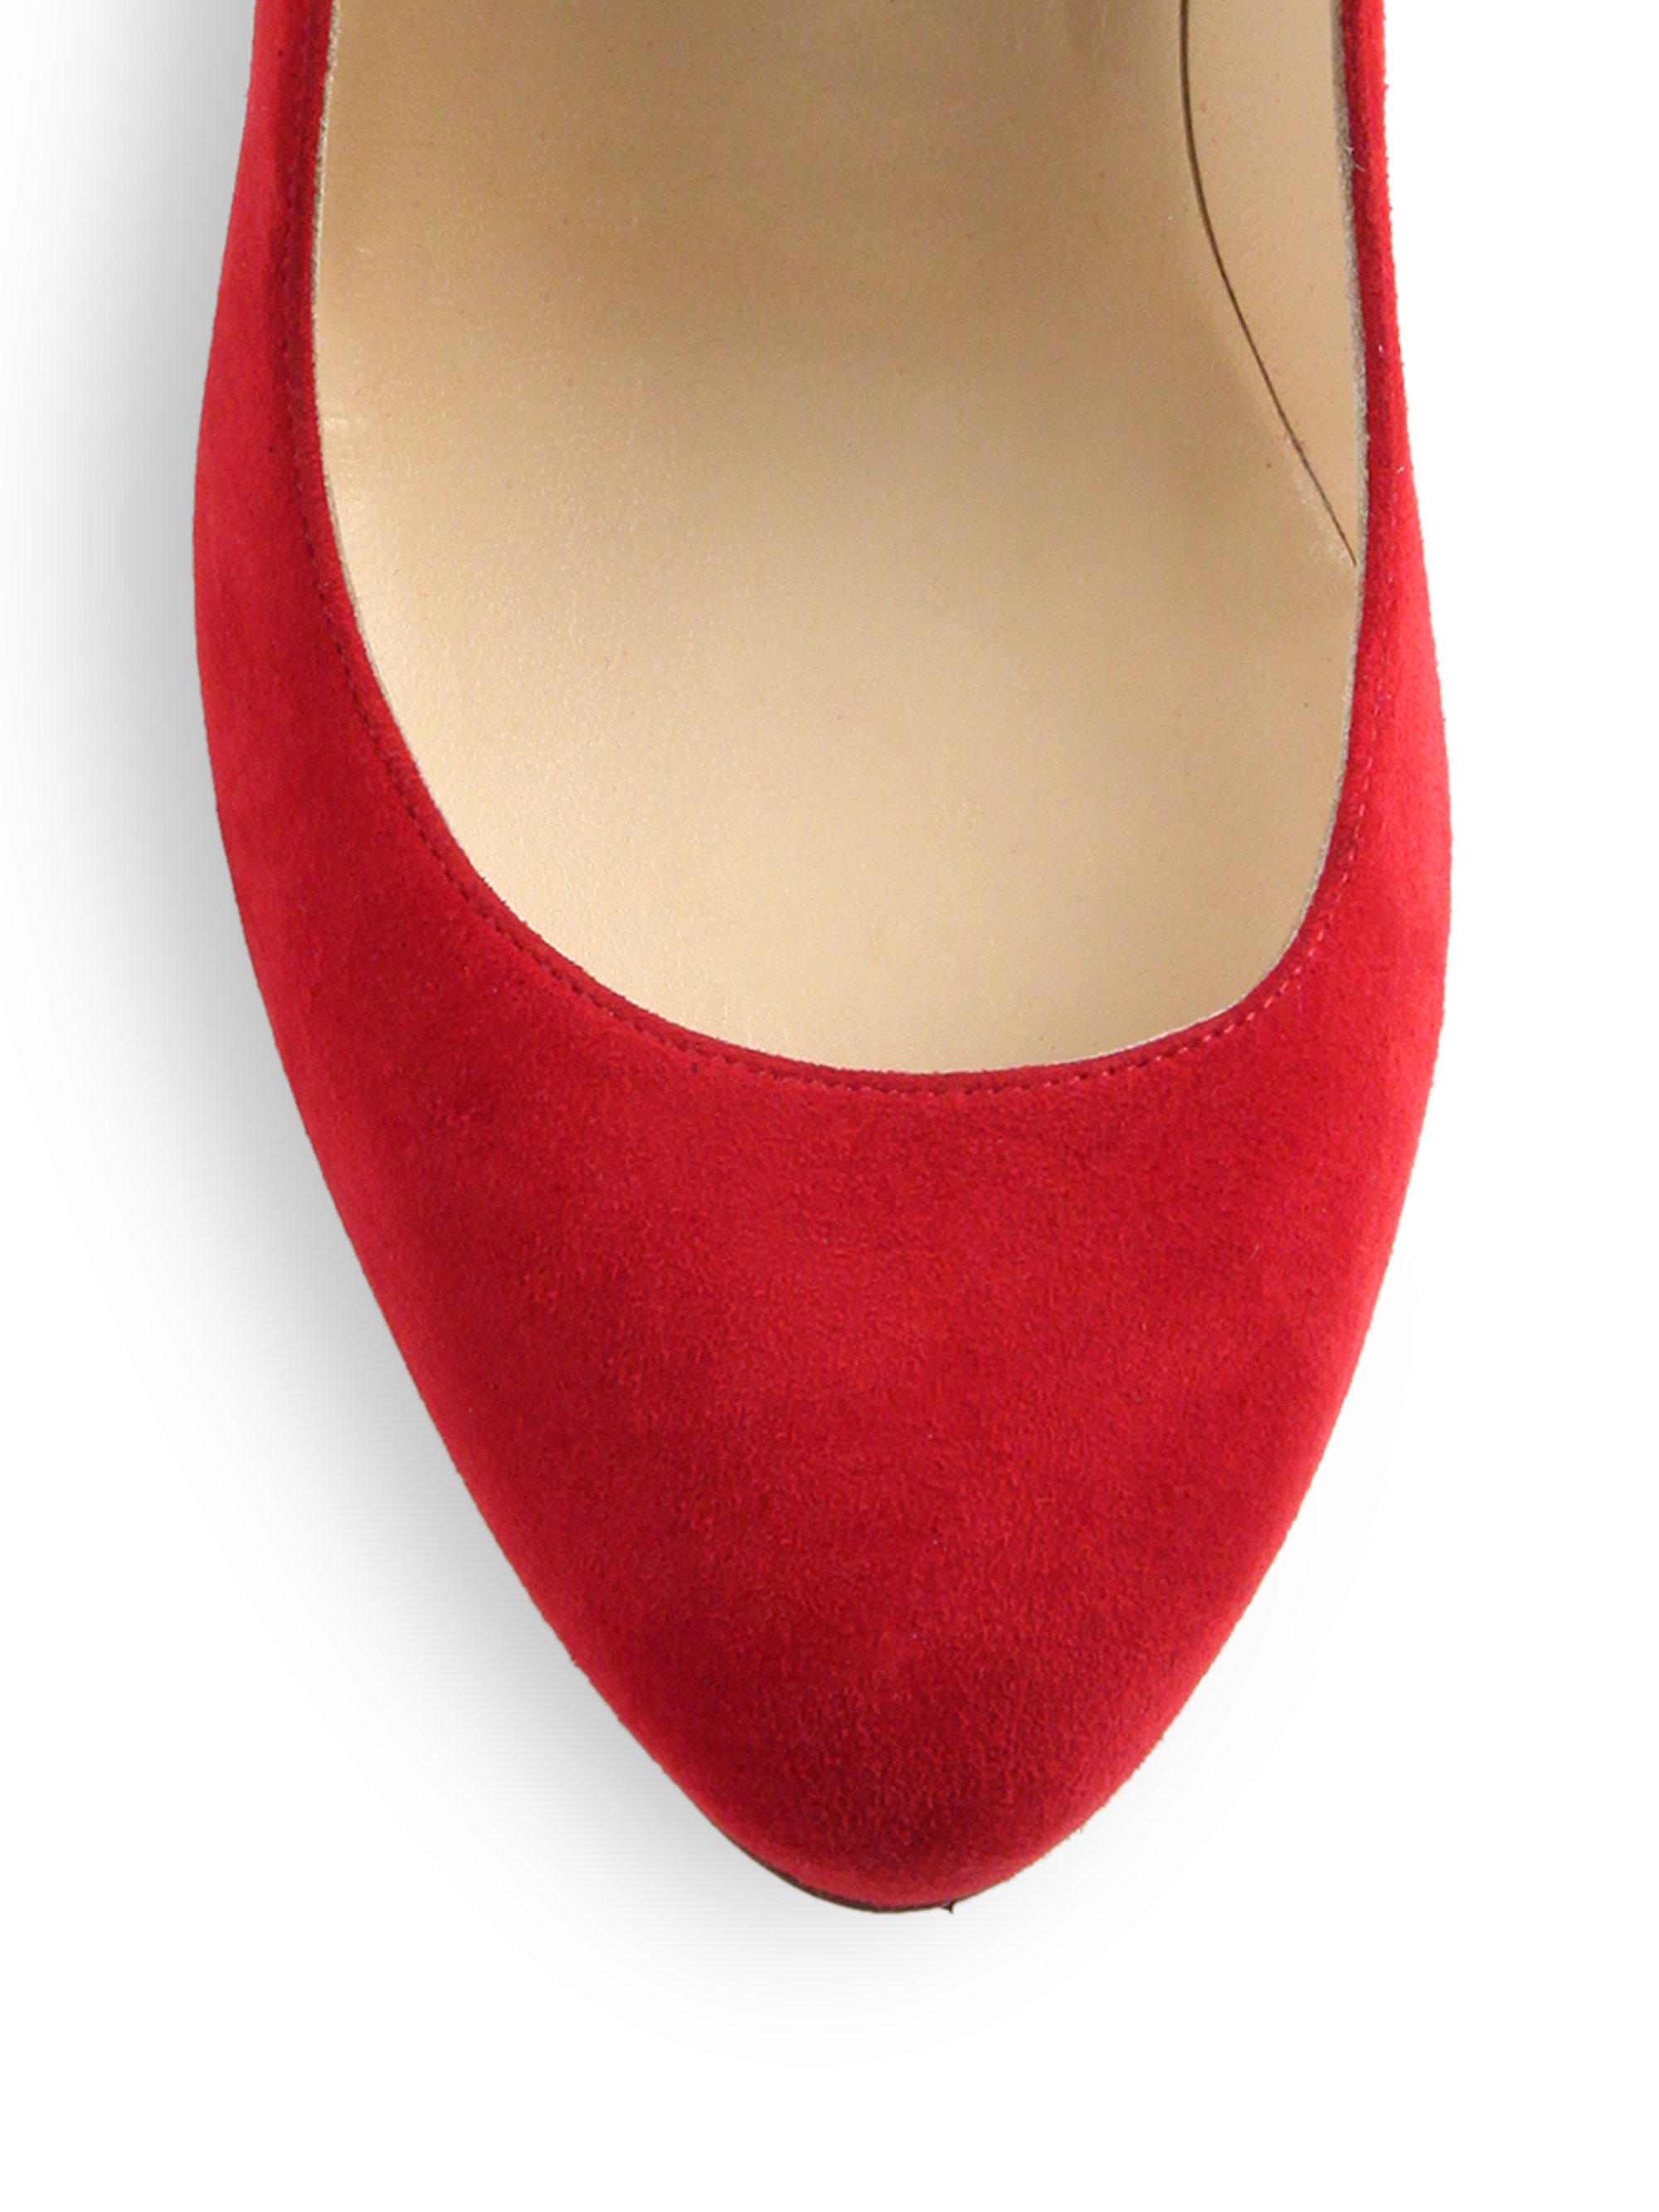 Christian louboutin Dorissima Suede Pumps in Red | Lyst